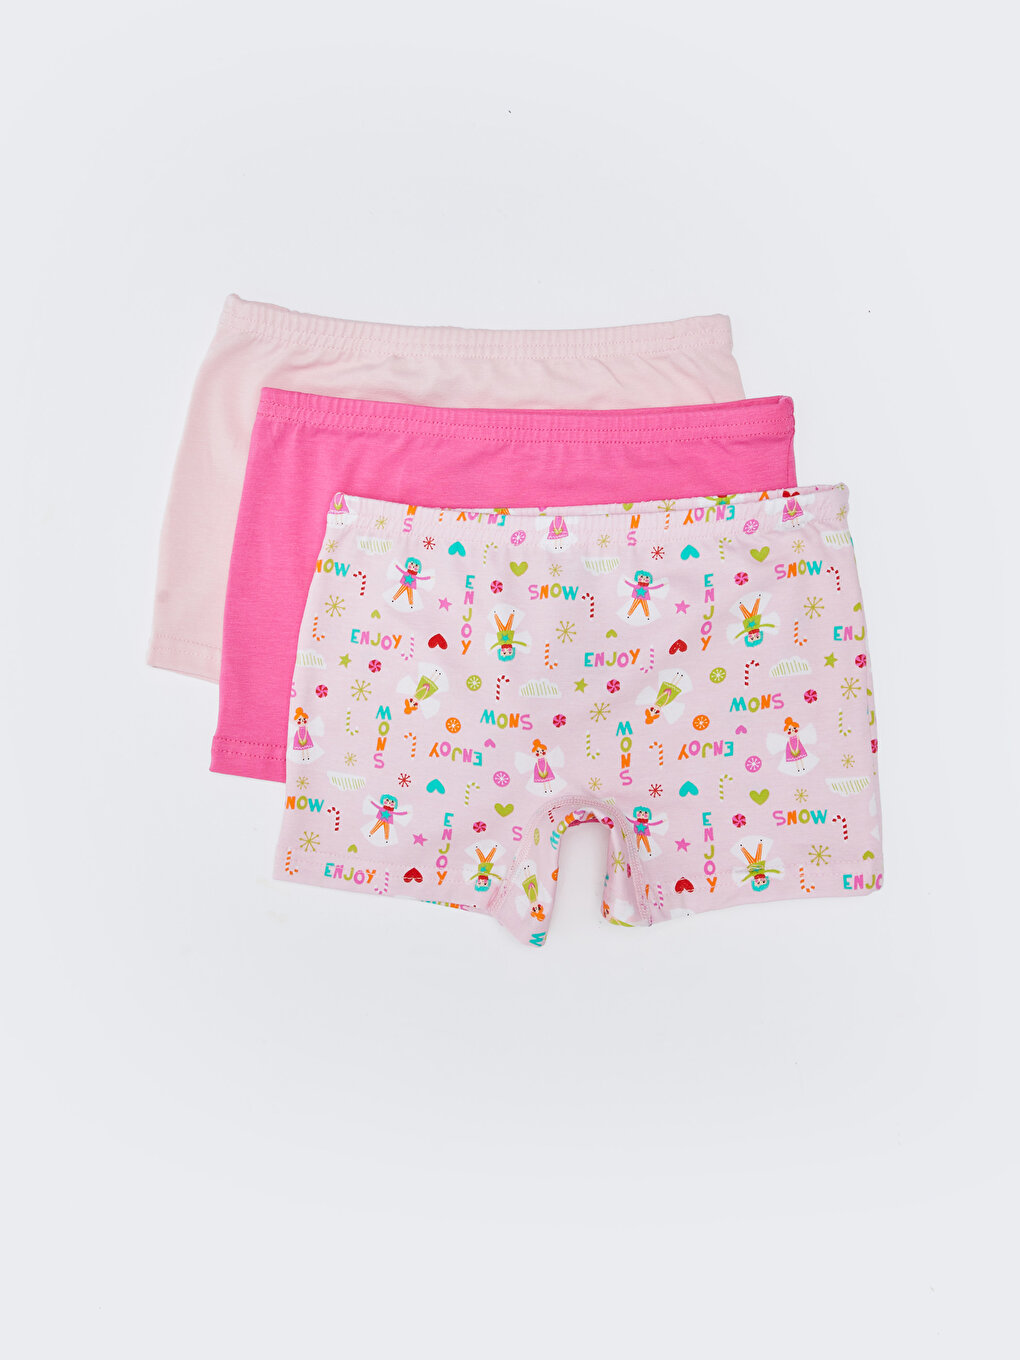 Women's Boxer Shorts (pack Of 3)